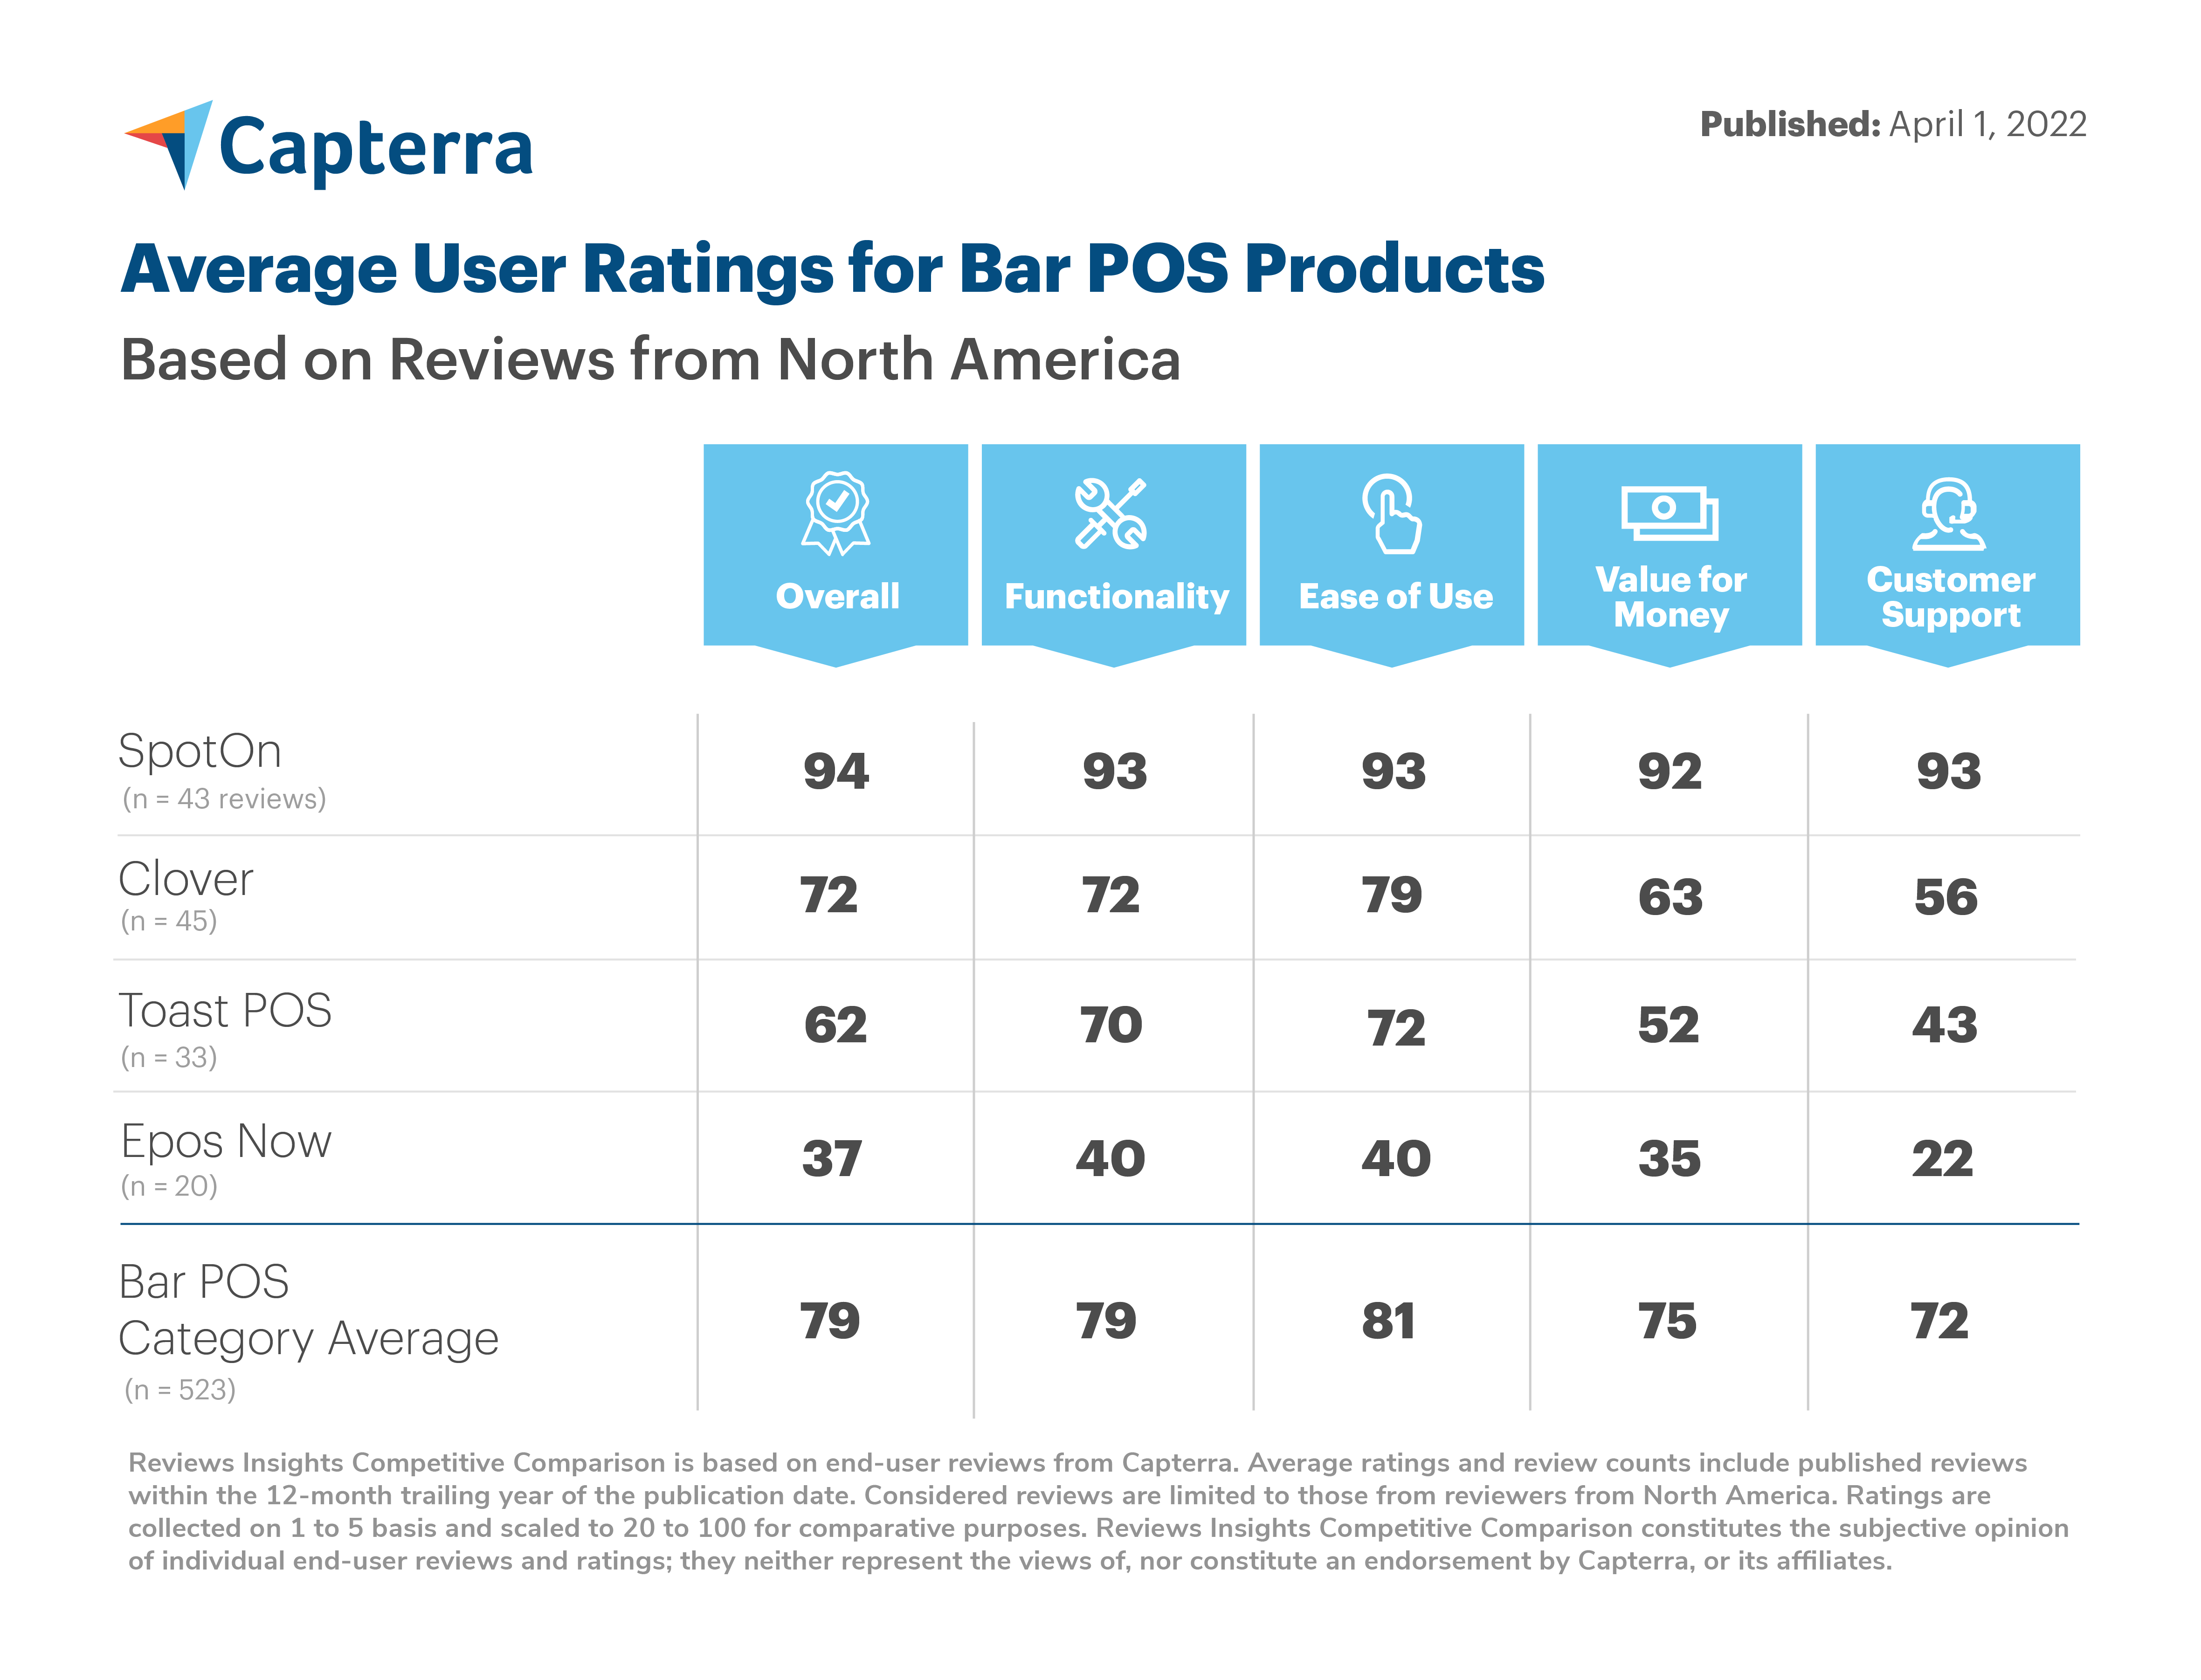 Capterra Average User Ratings for Bar POS products: SpotOn 94, Clover 72, Toast 62, Epos Now 37